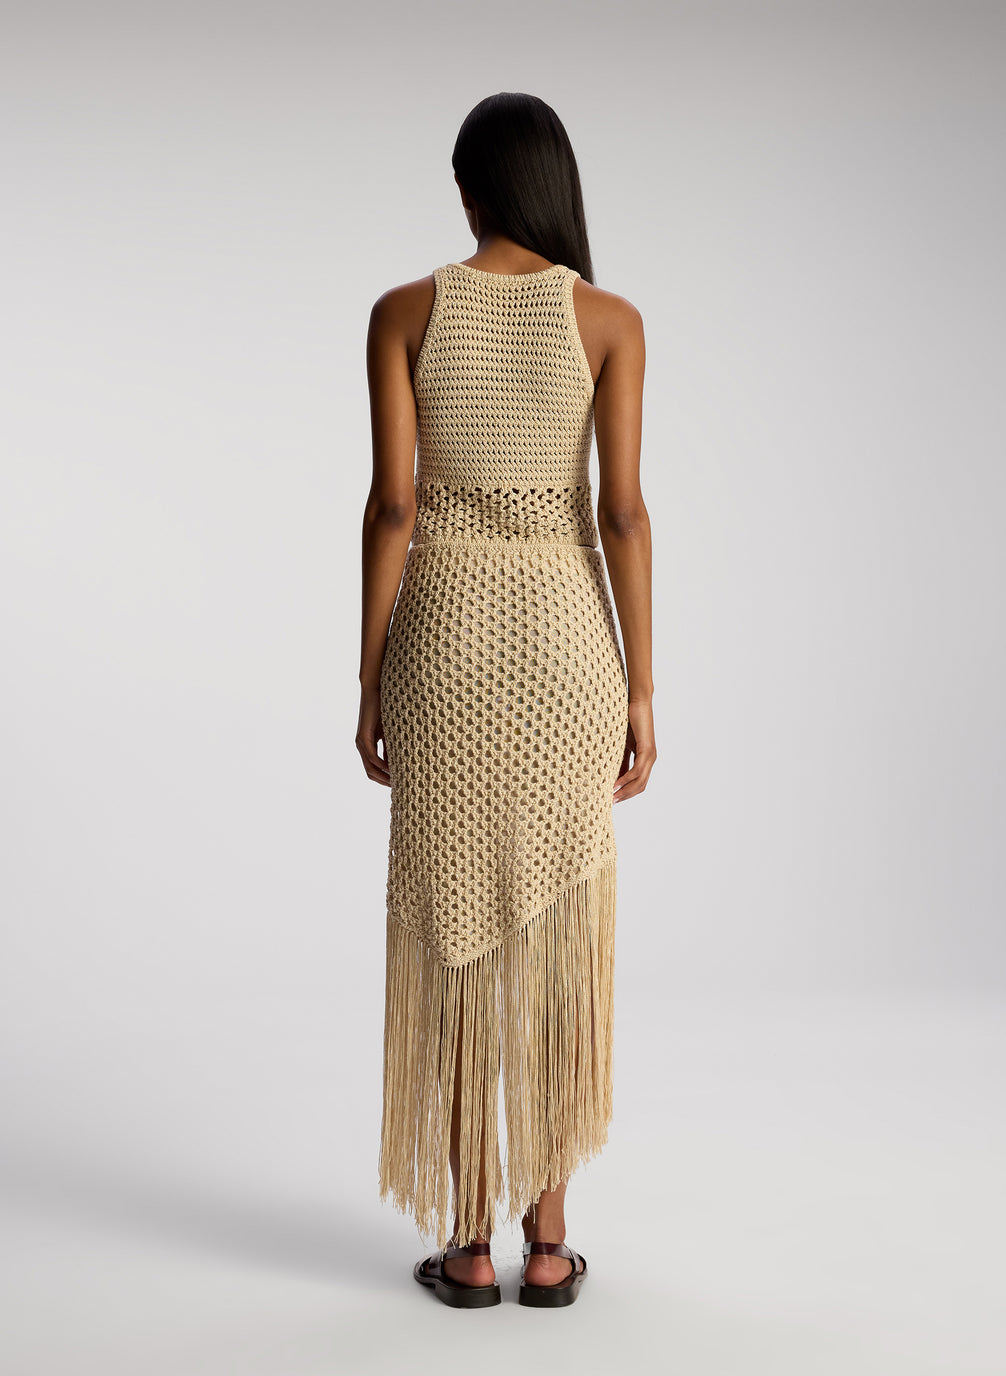 back view of woman wearing tan crochet top and skirt set